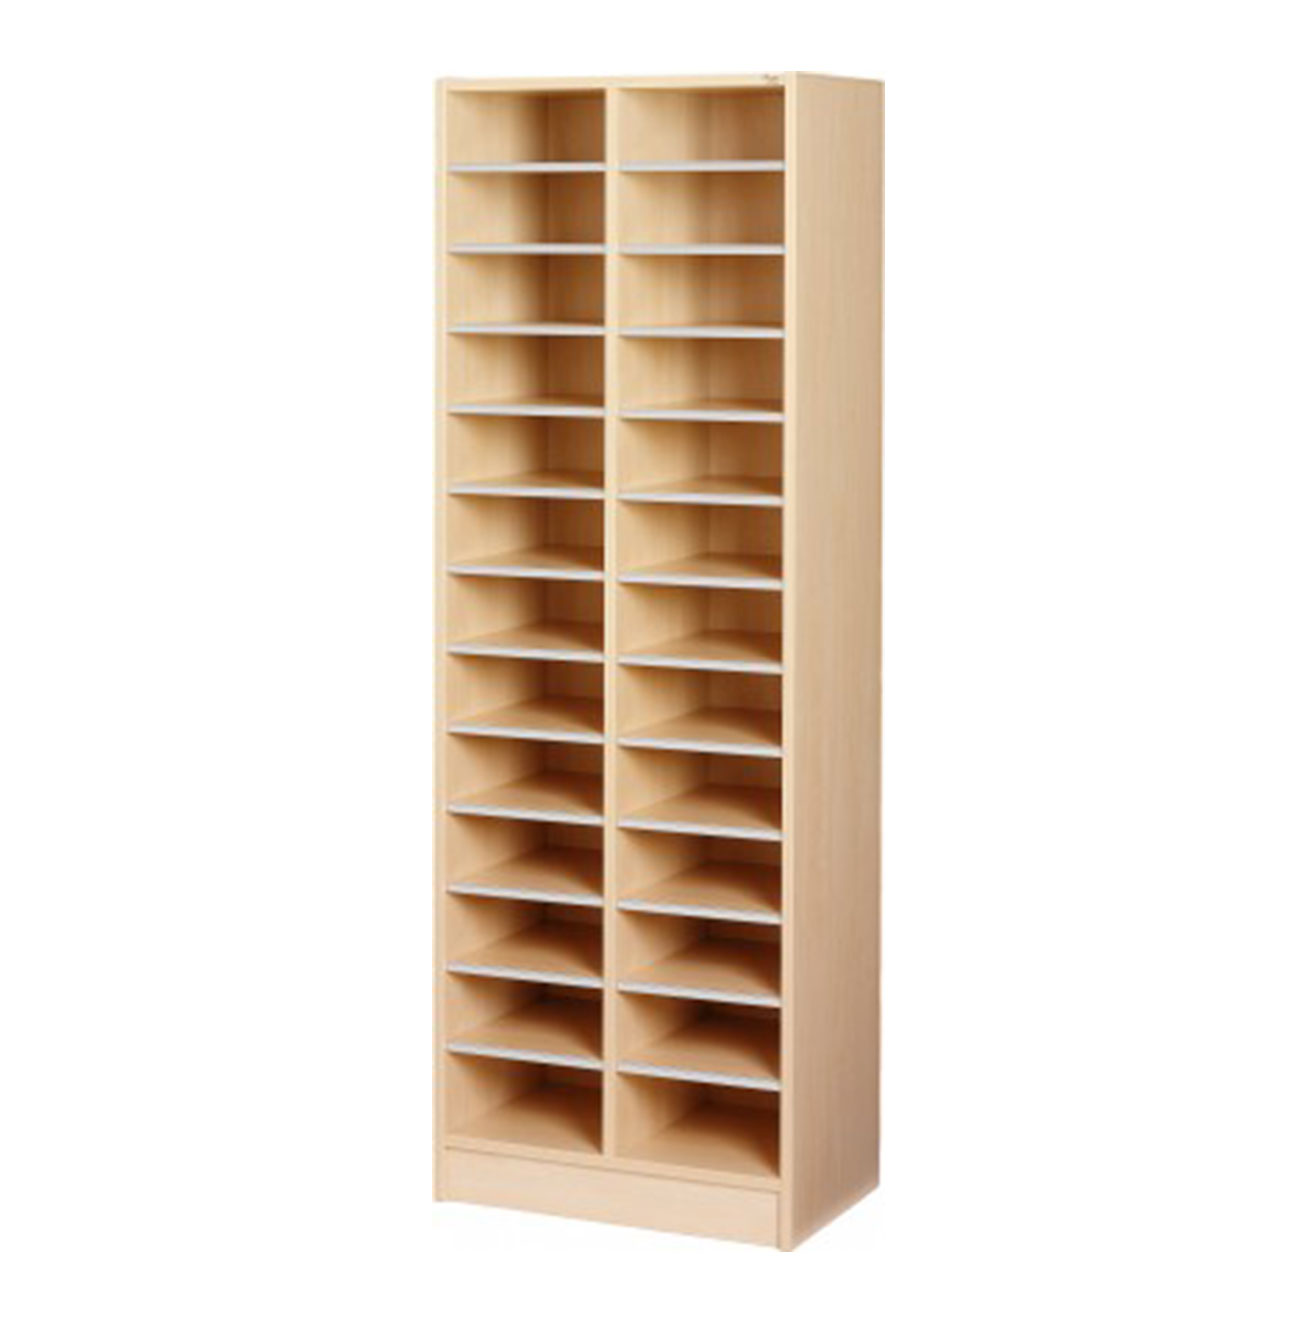 Double Pigeon Hole Cabinet - Birch